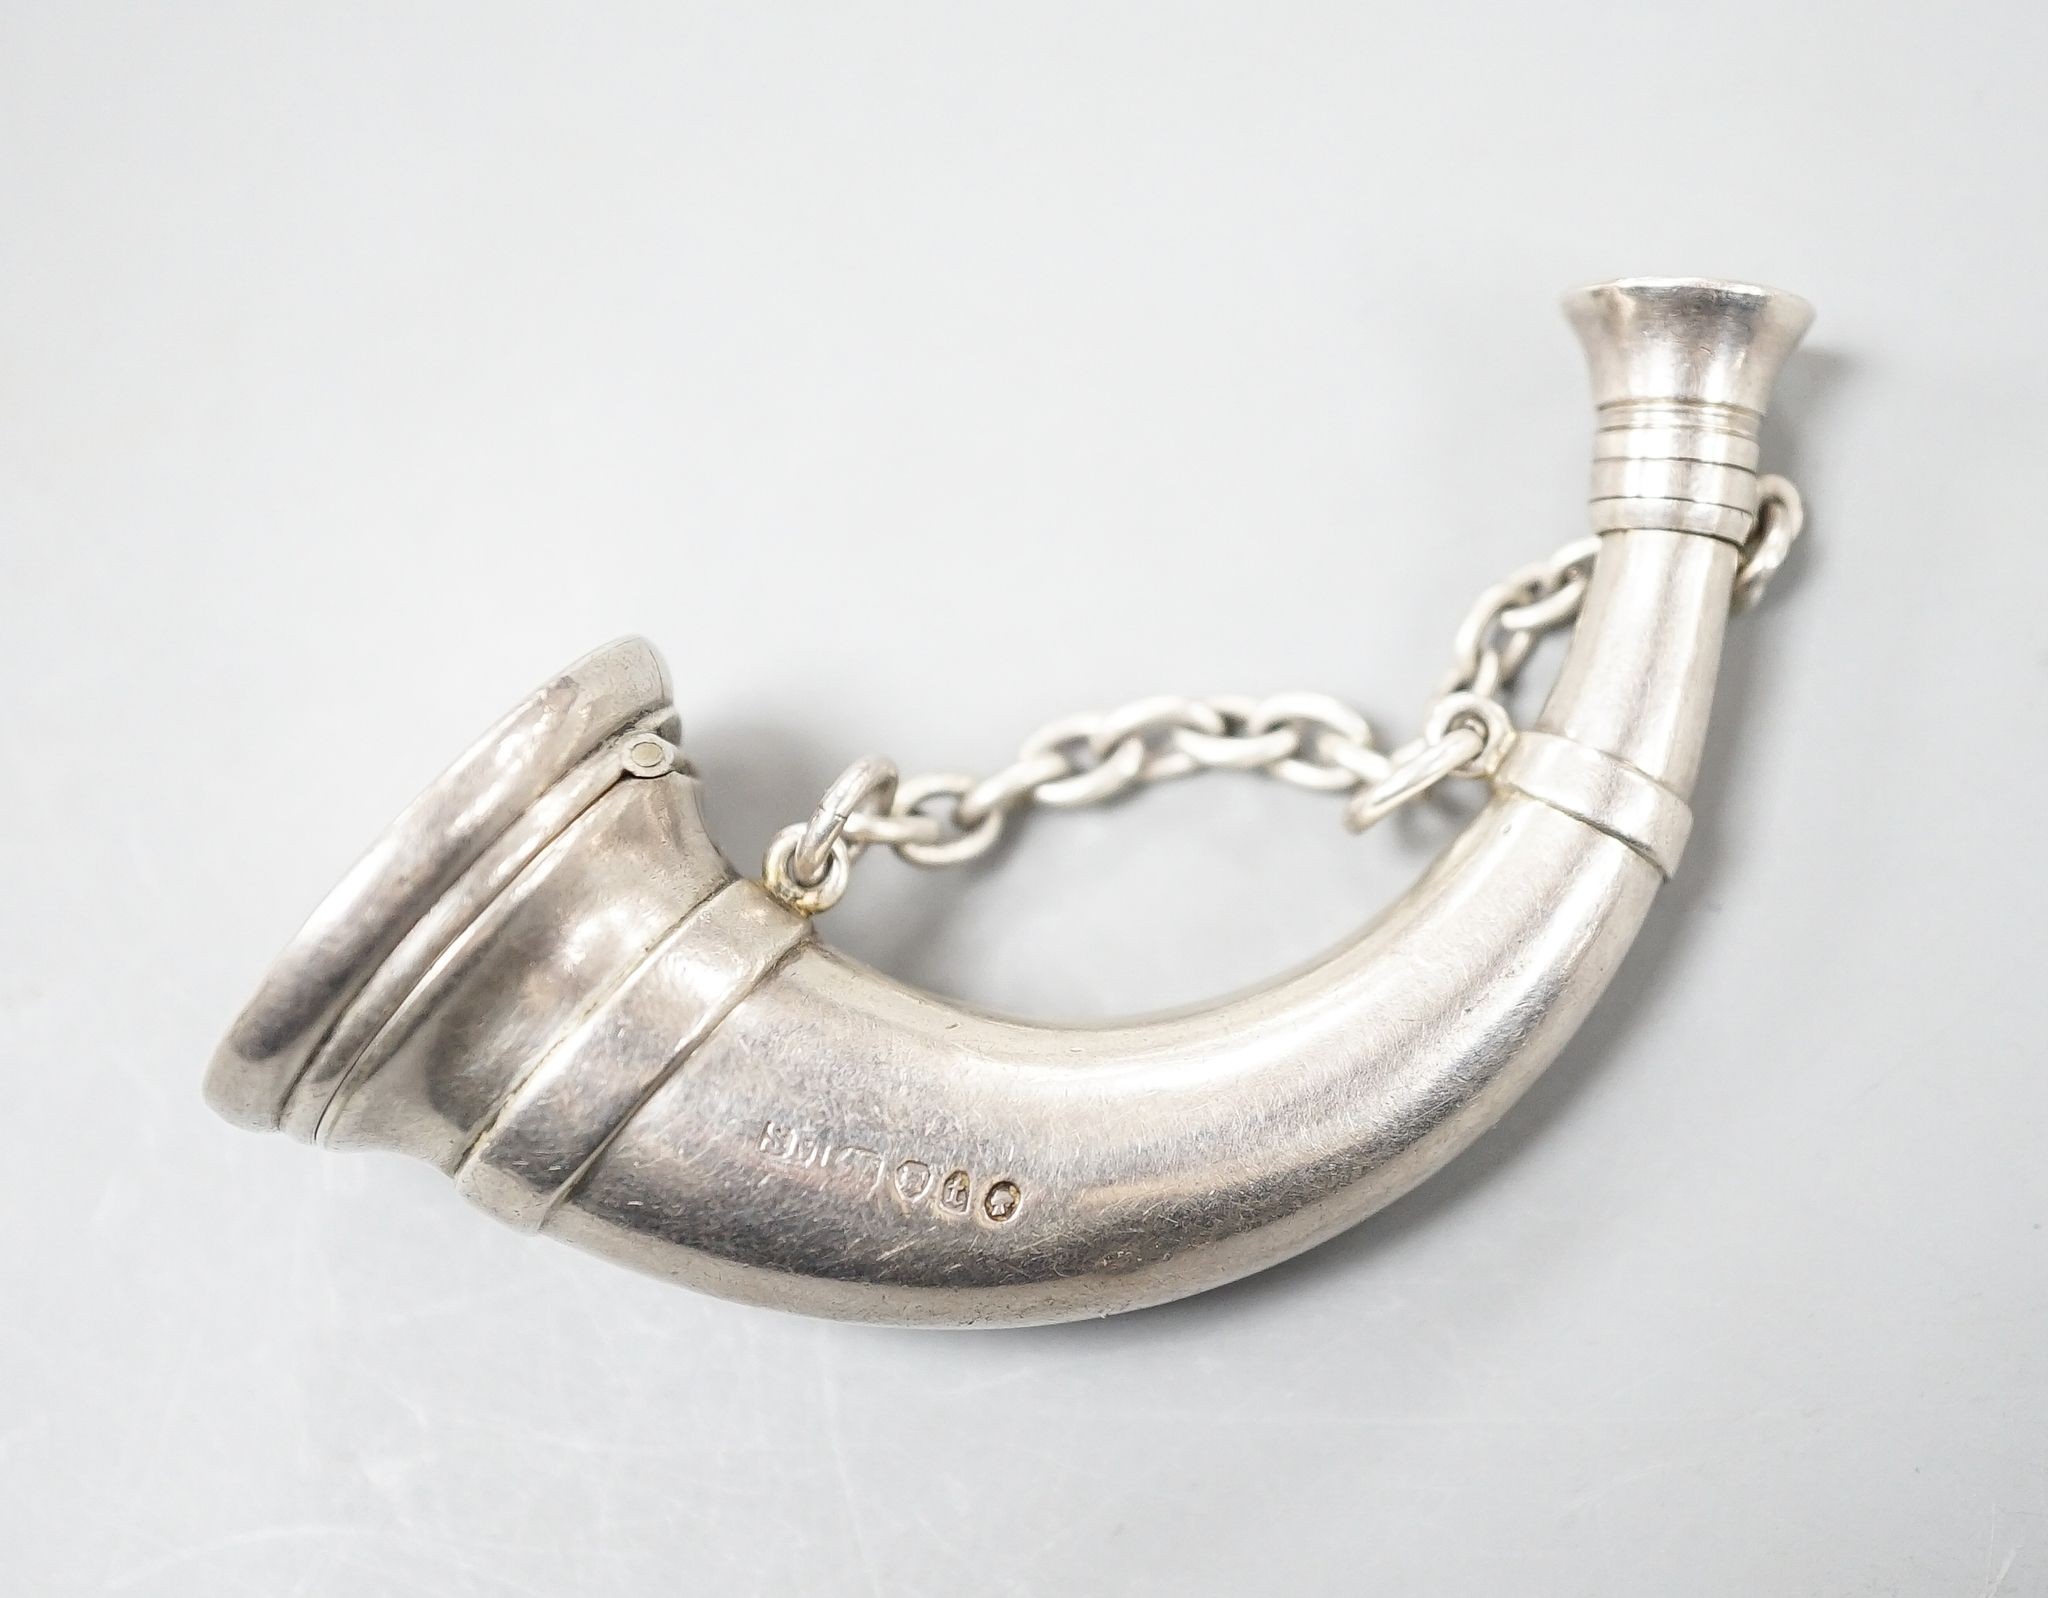 A Victorian novelty silver vinaigrette, modelled as a hunting horn, by Sampson Mordan & Co, London, 1874, 76mm, with engraved initials.